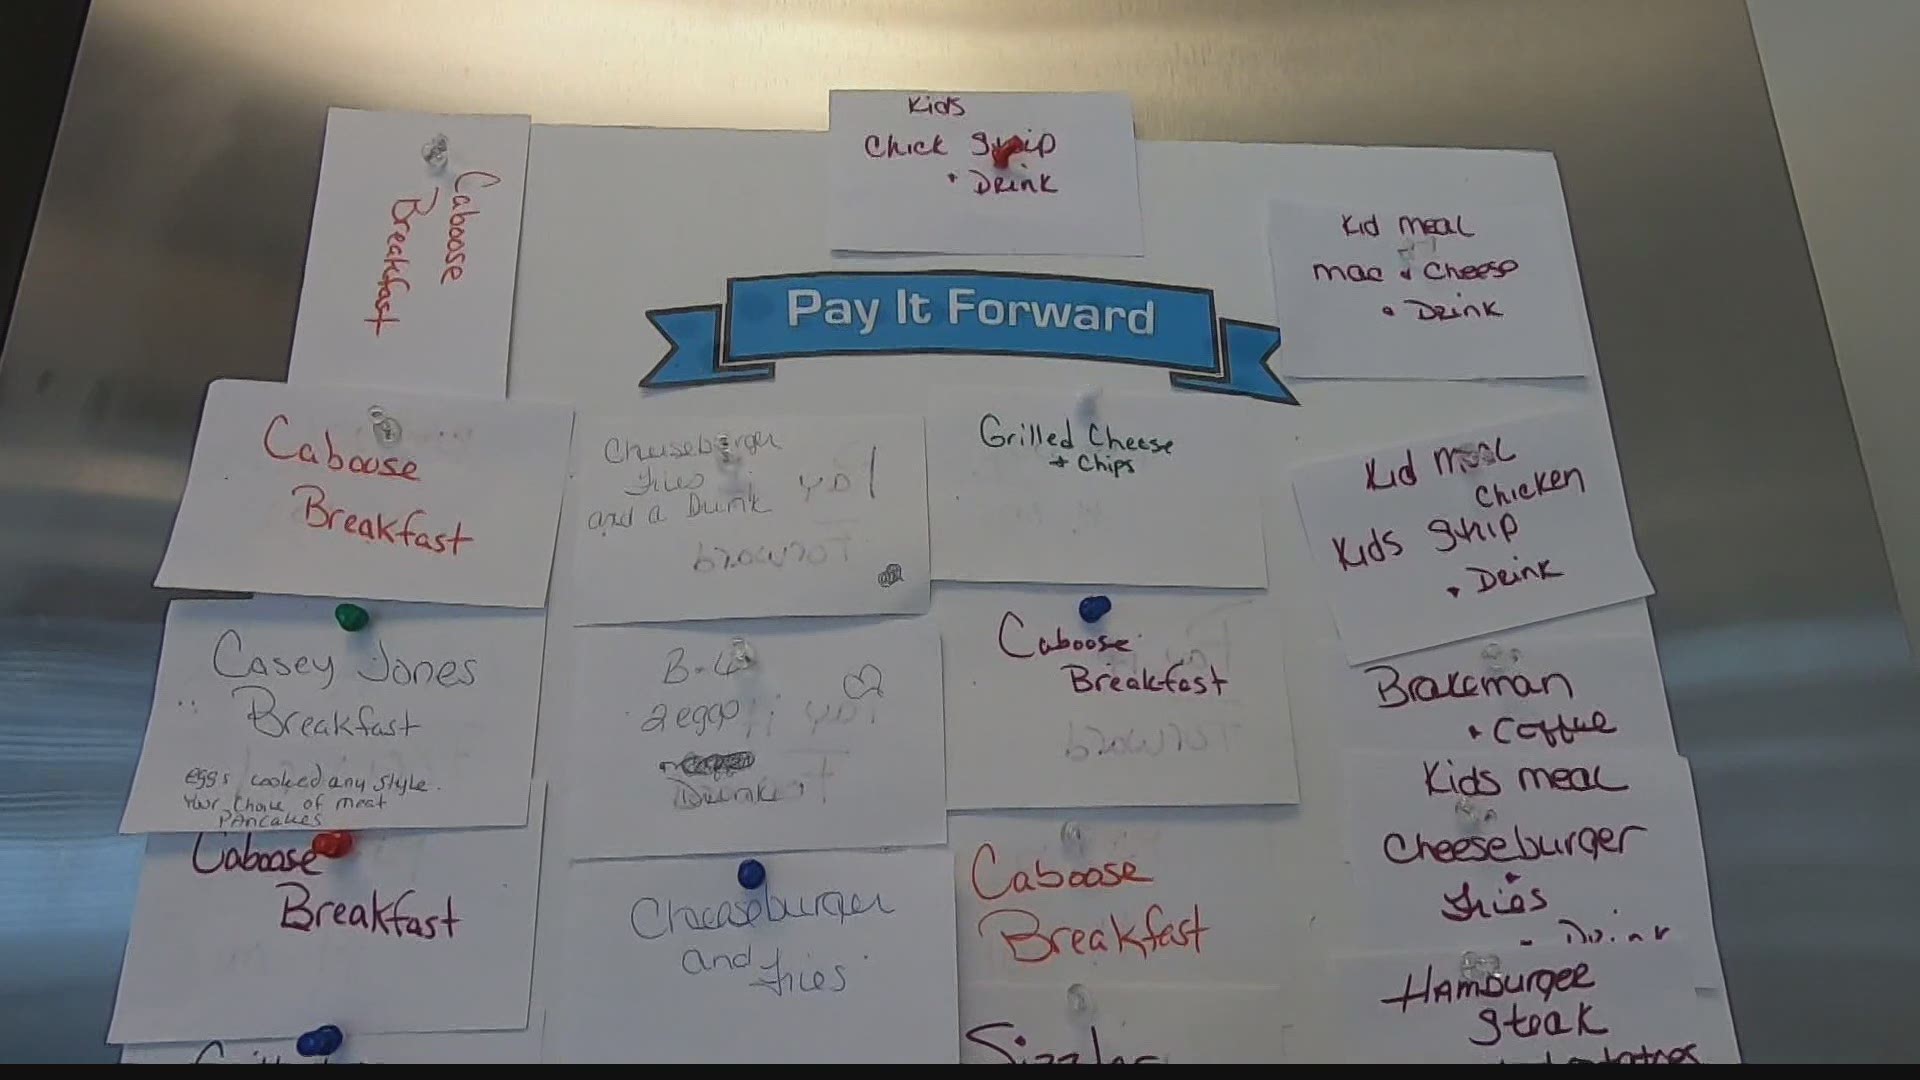 It started with one 'pay it forward board' and it has spread to several other businesses across Peru.